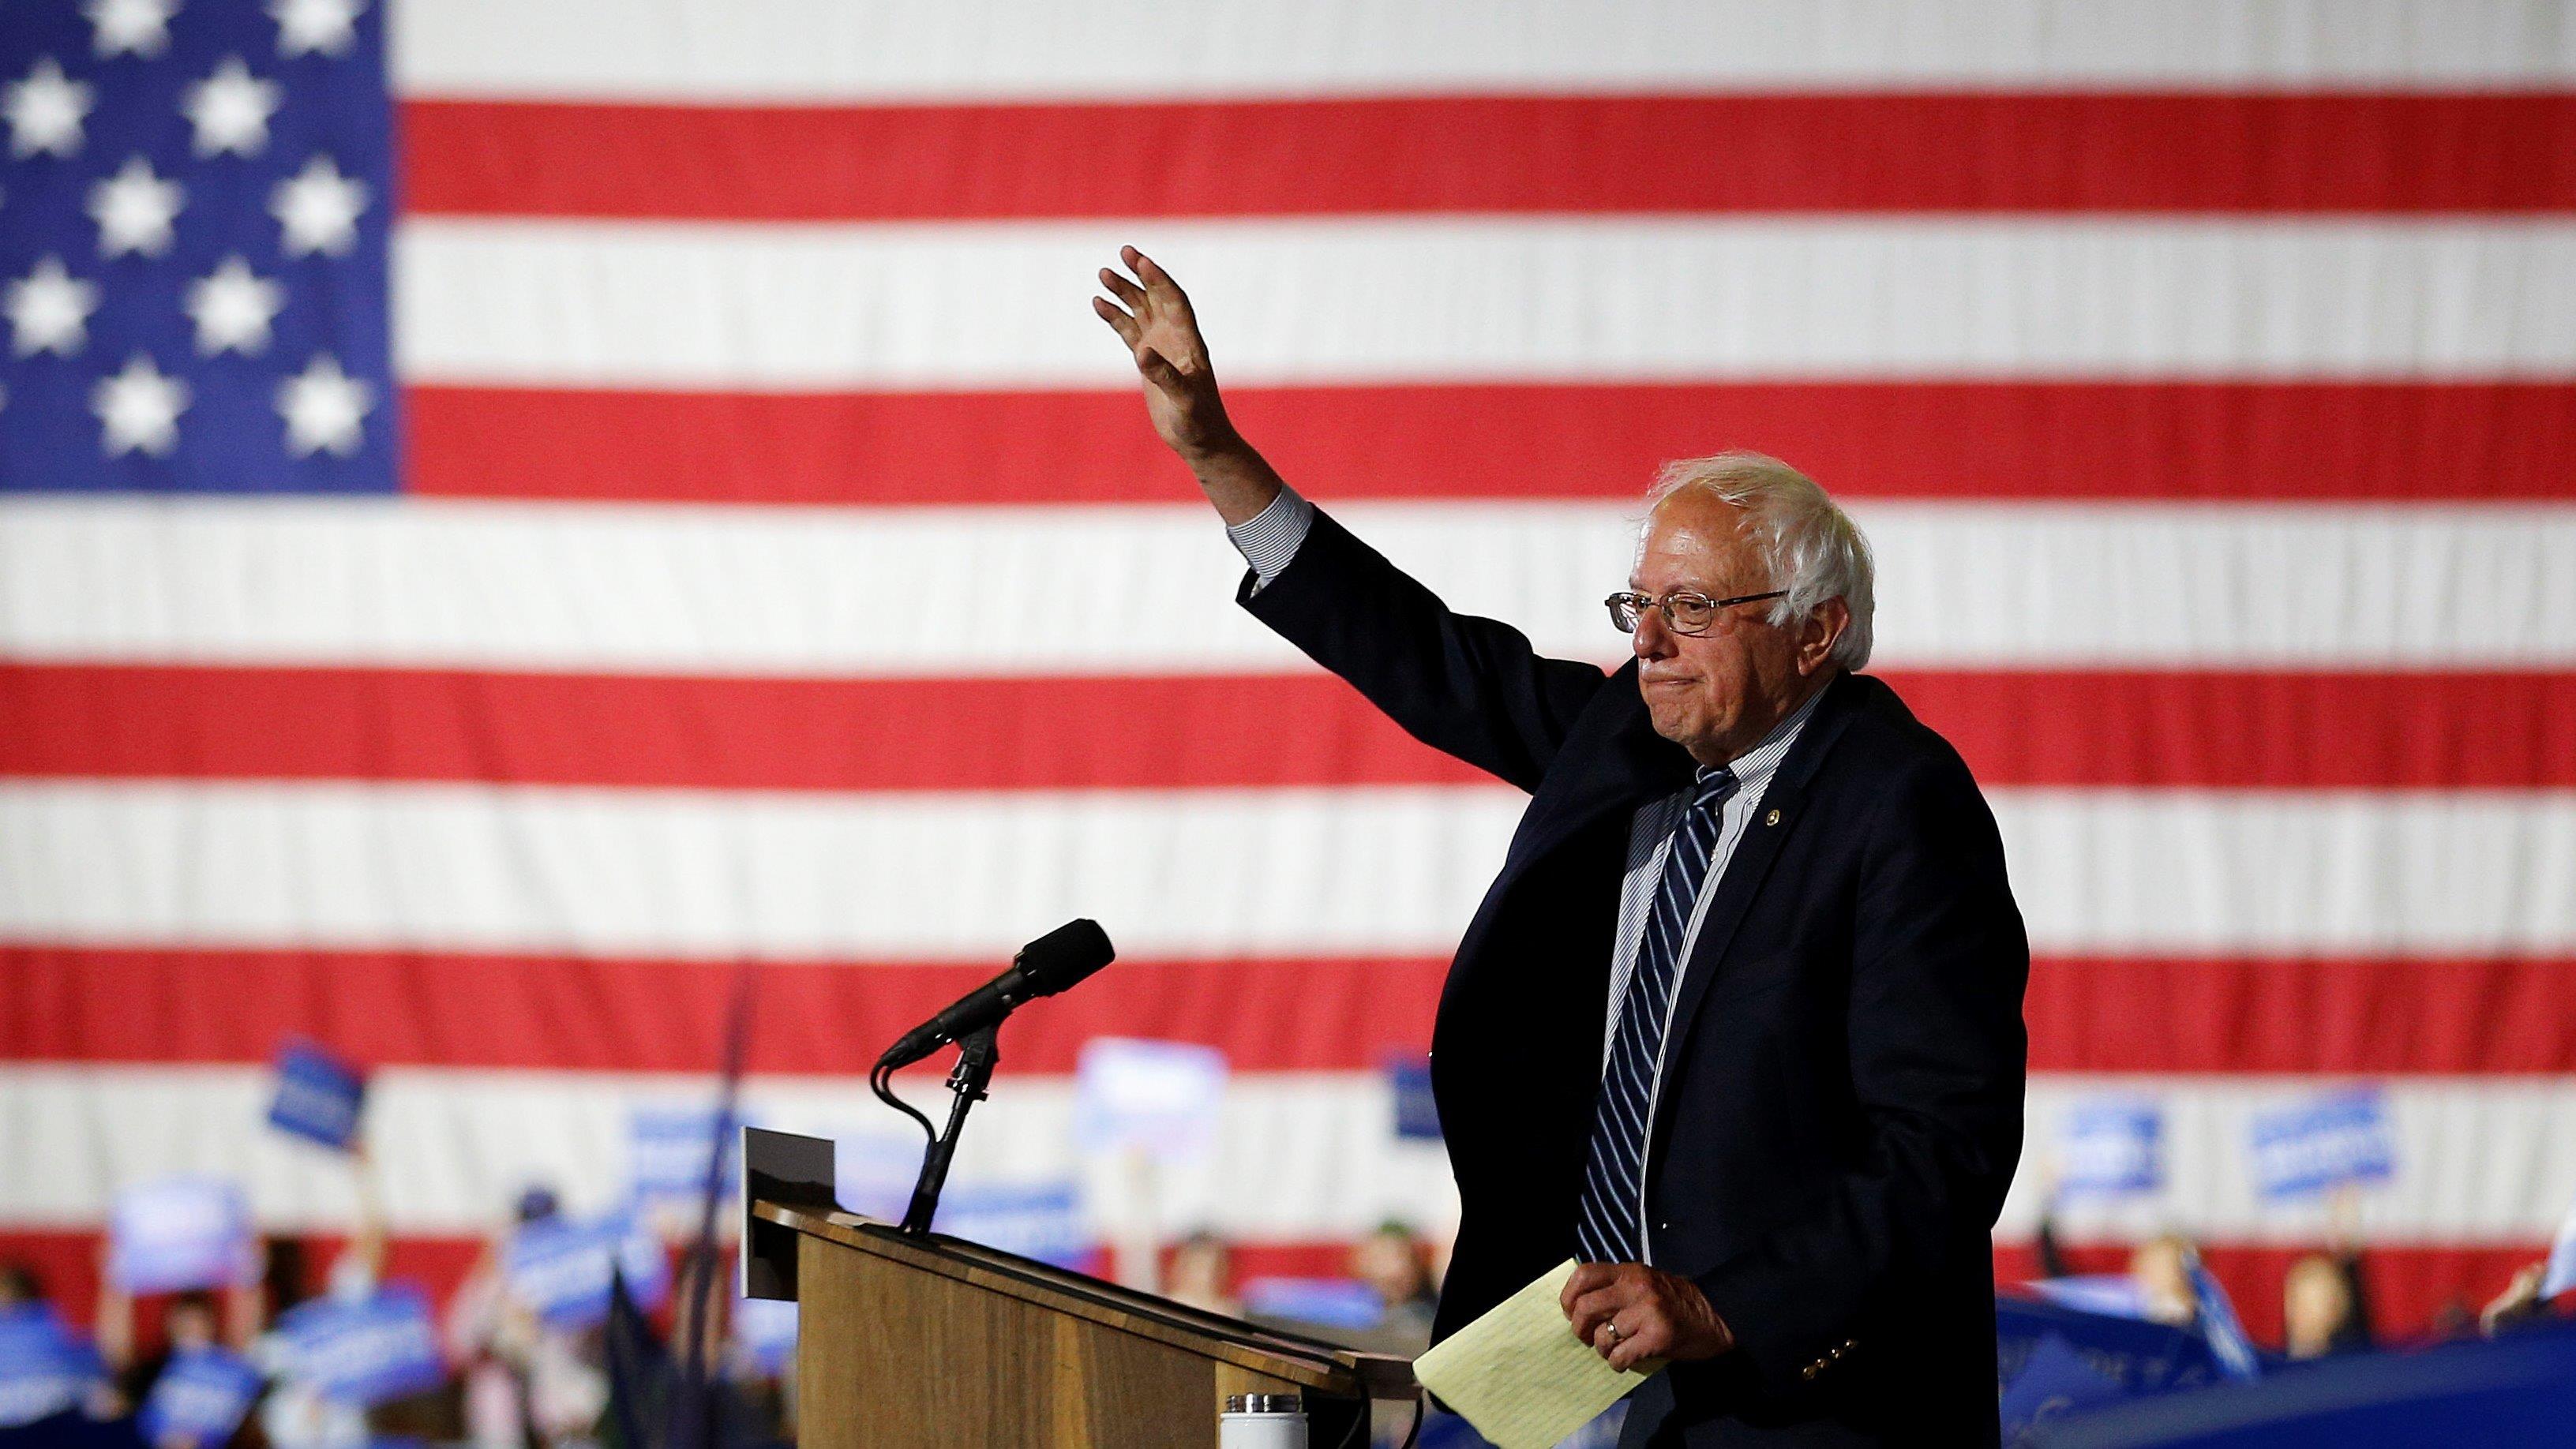 Party unity on the line as Sanders faces calls to exit race